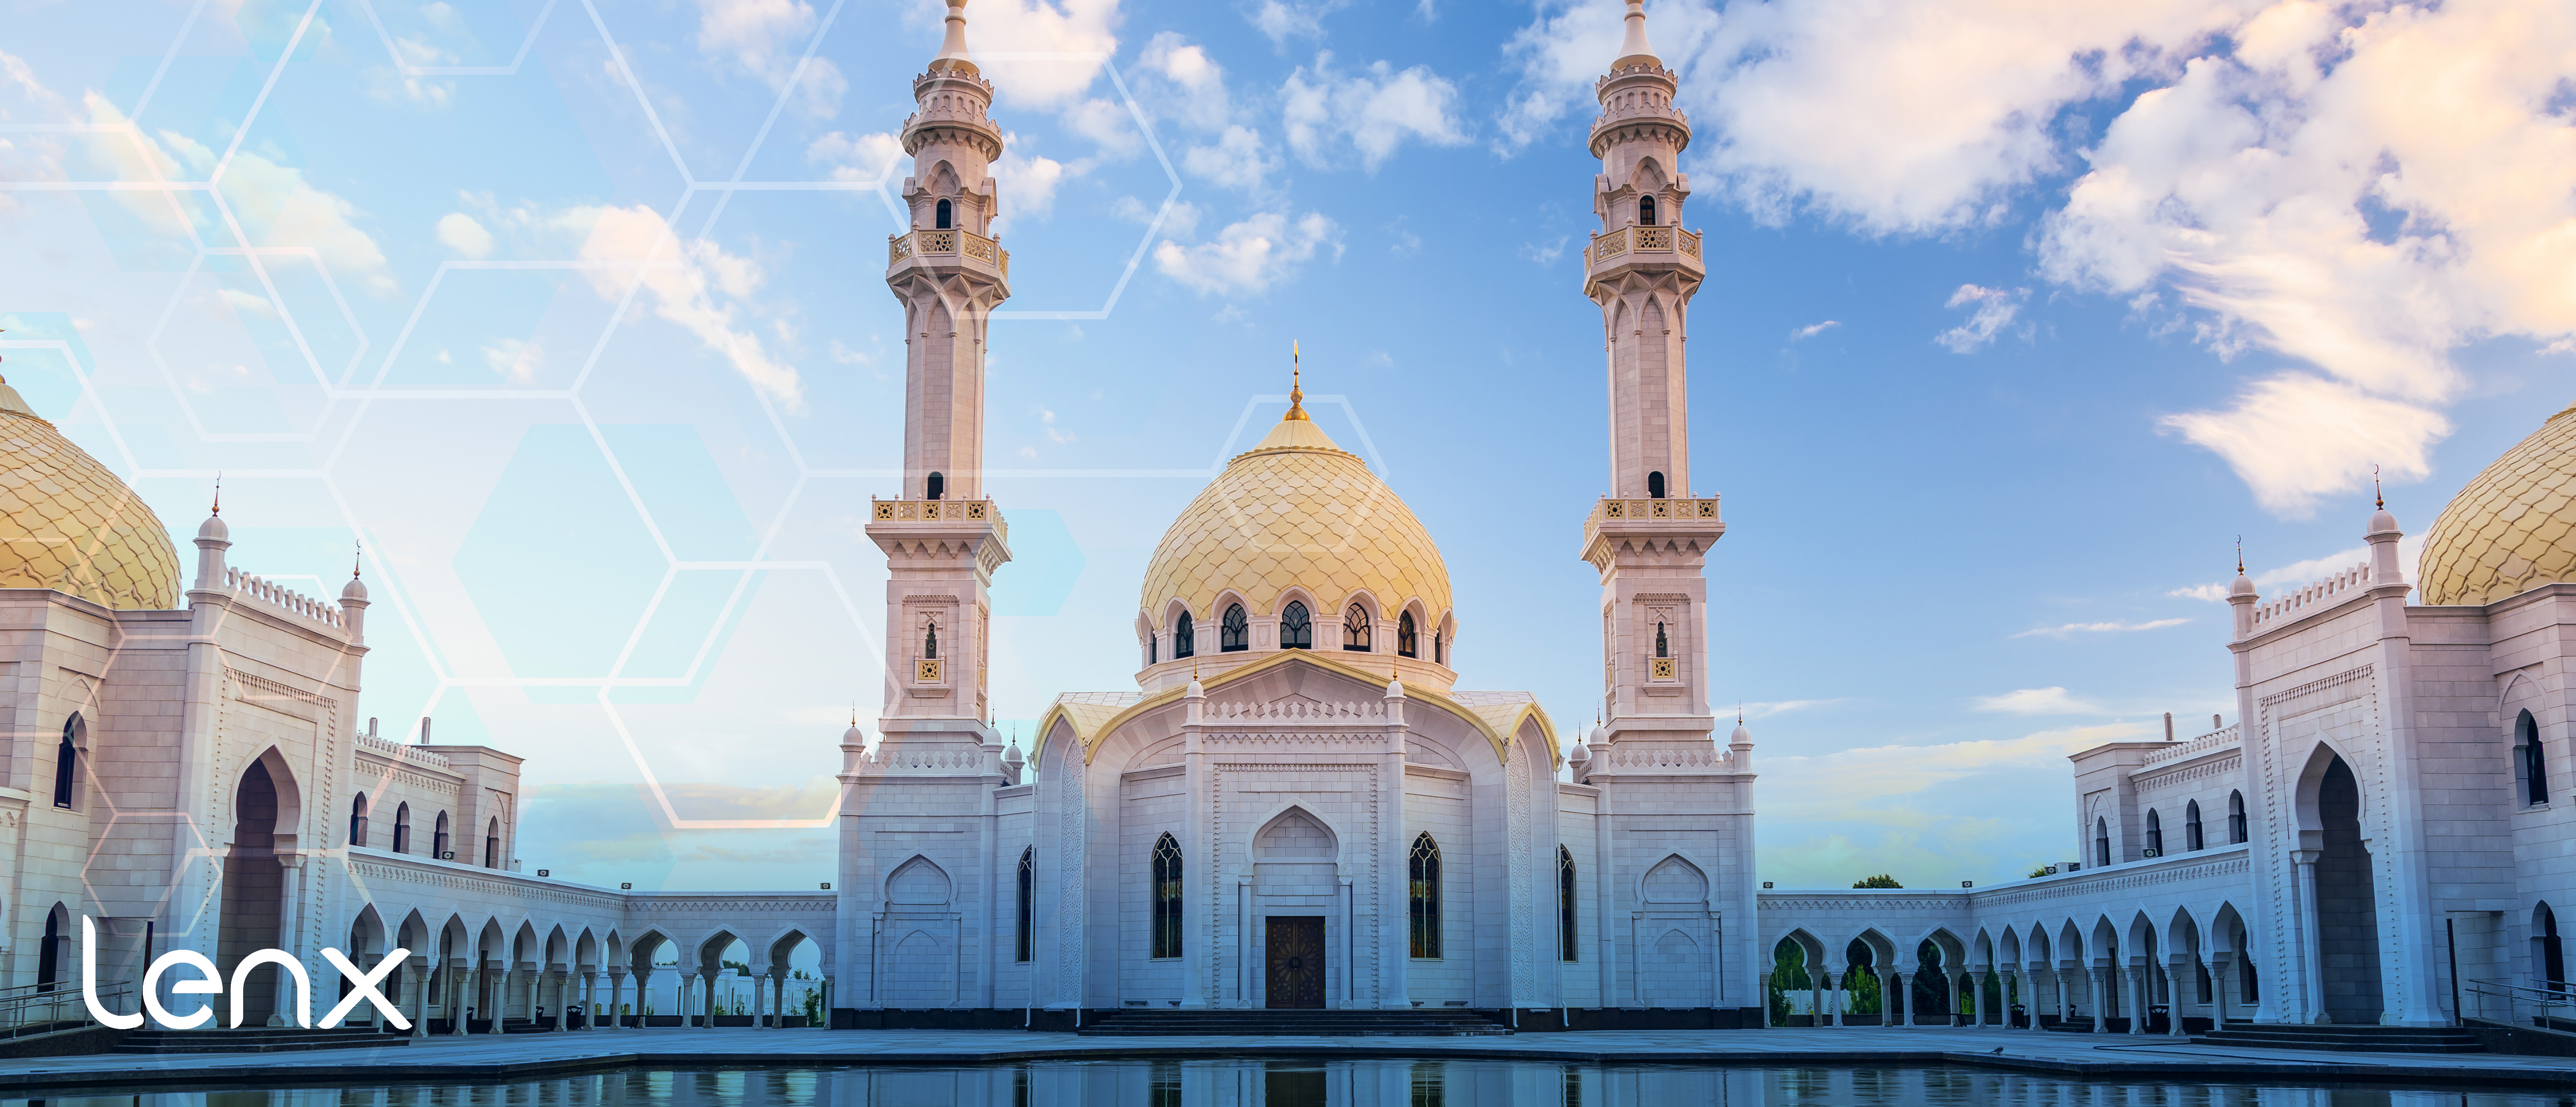 Protecting Religious Buildings, Sites With AI Security and Active Shooter Detection